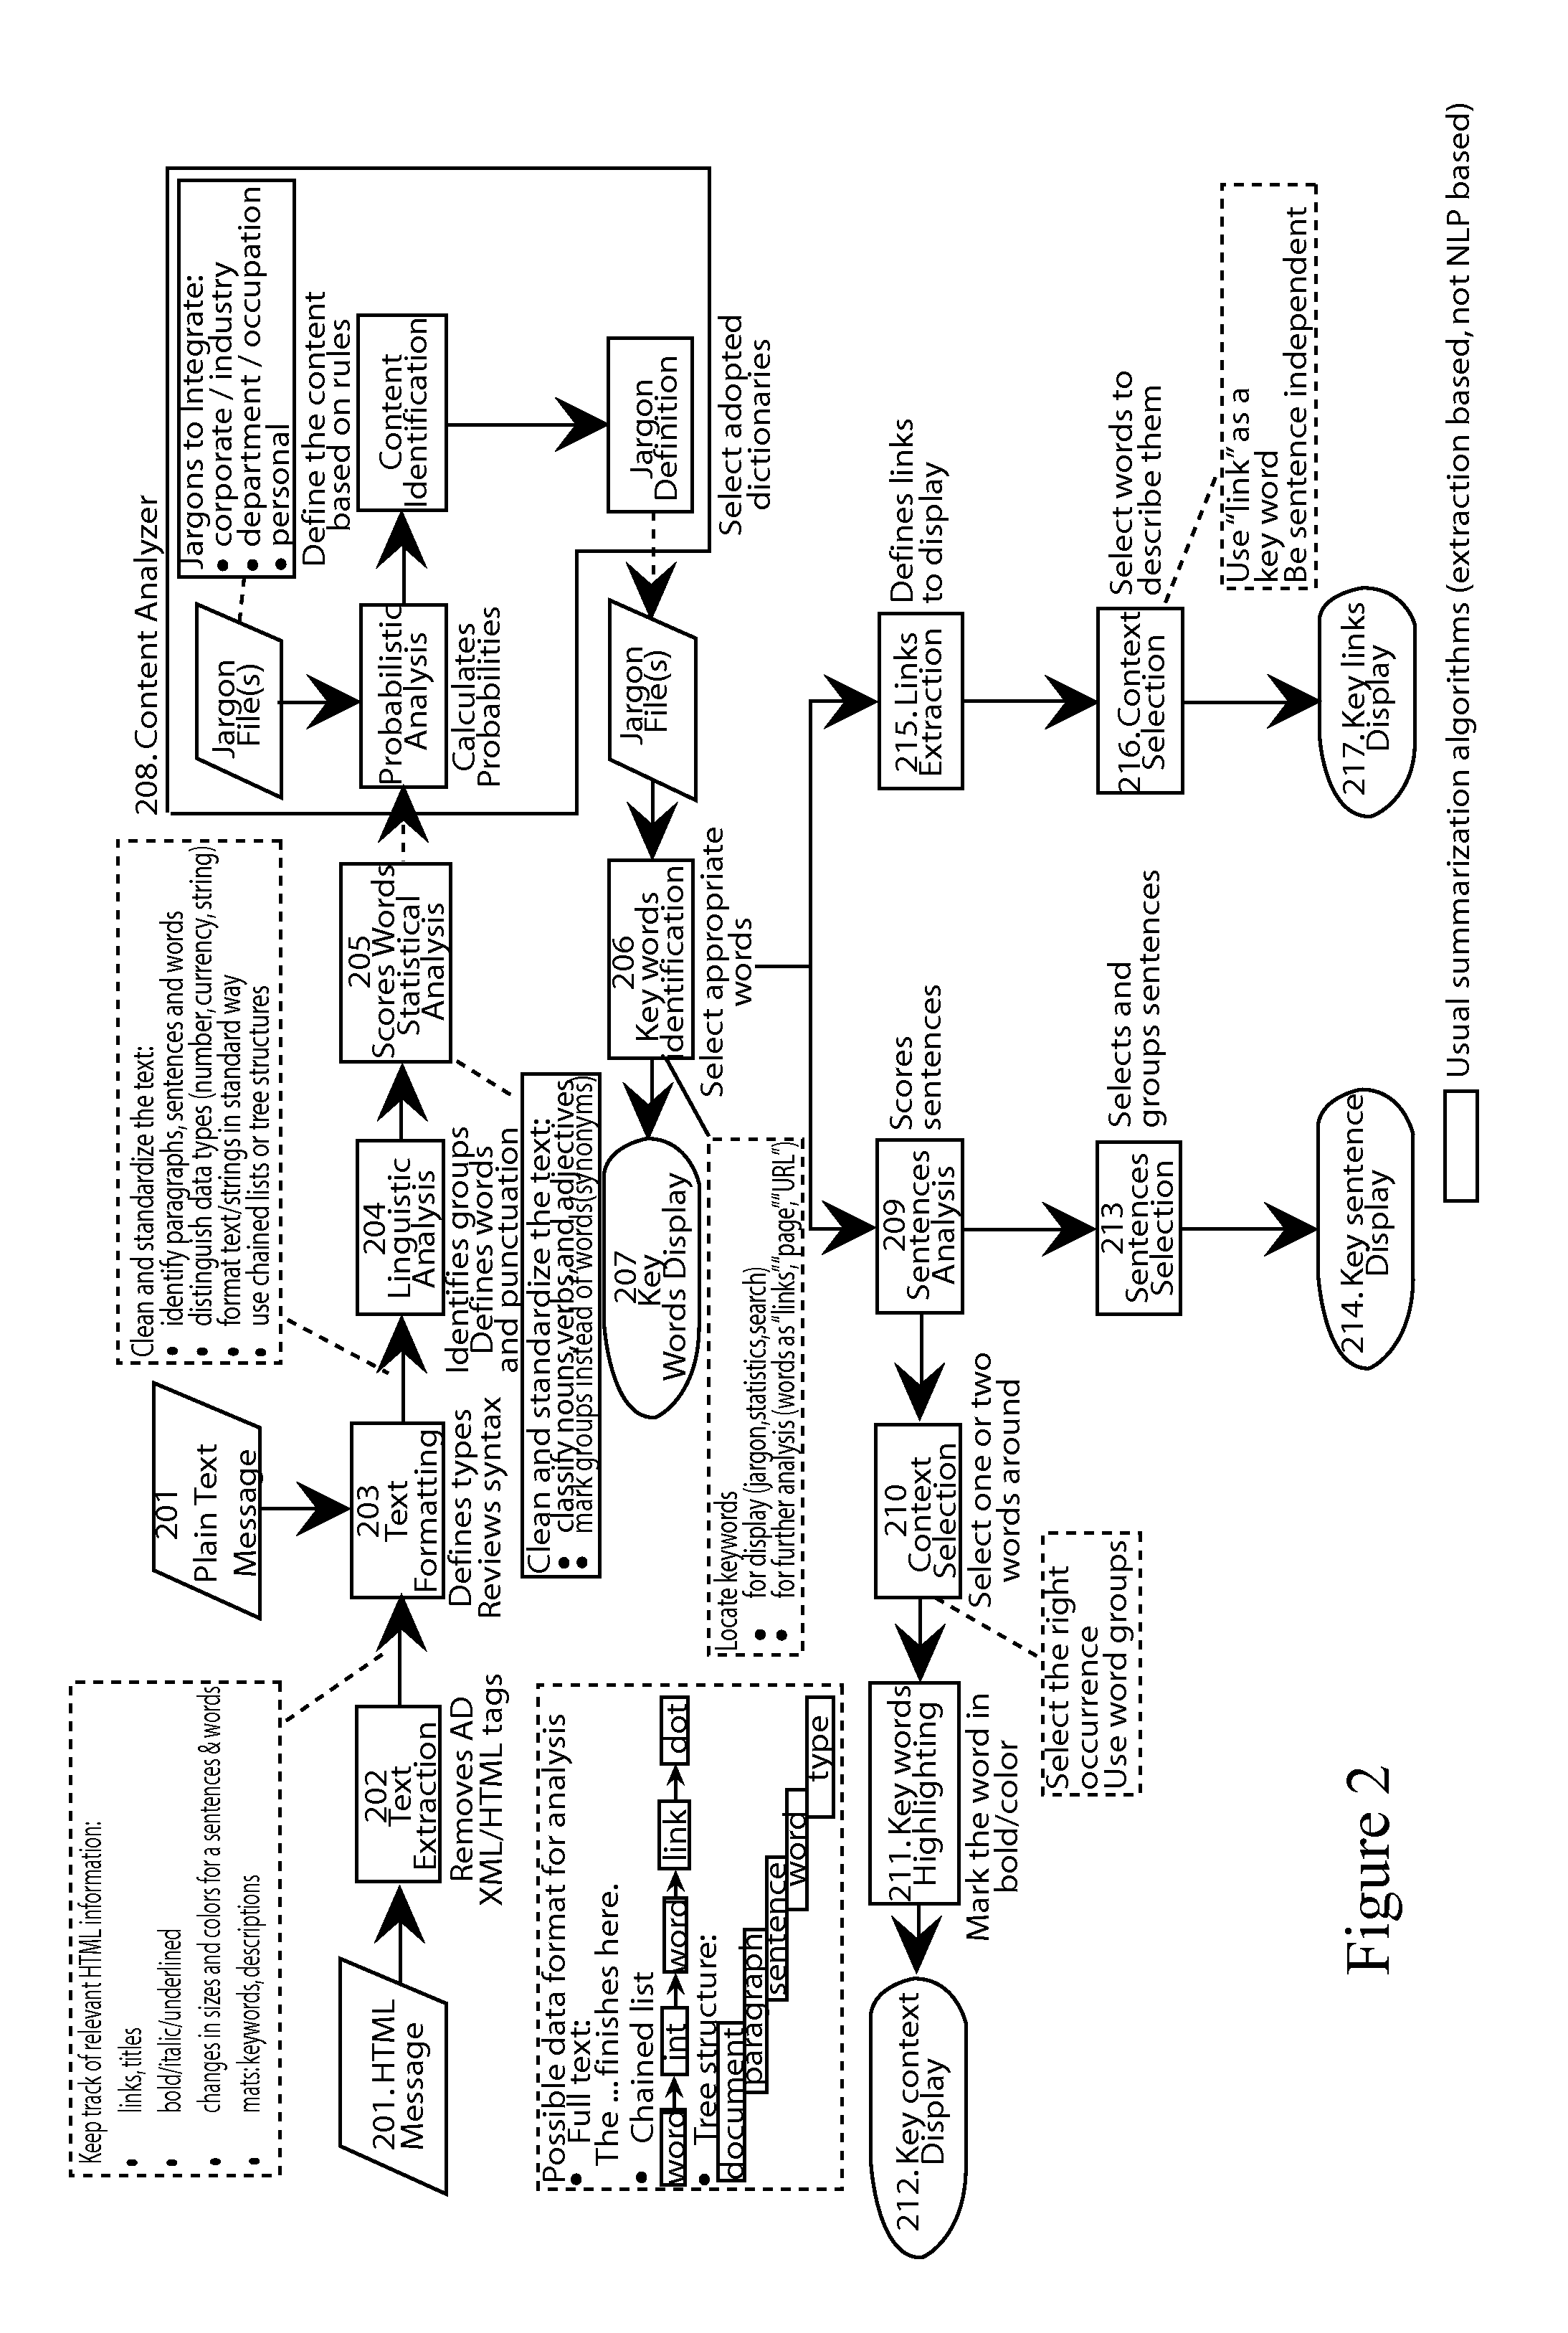 System and method for dynamic adaptive user-based prioritization and display of electronic messages